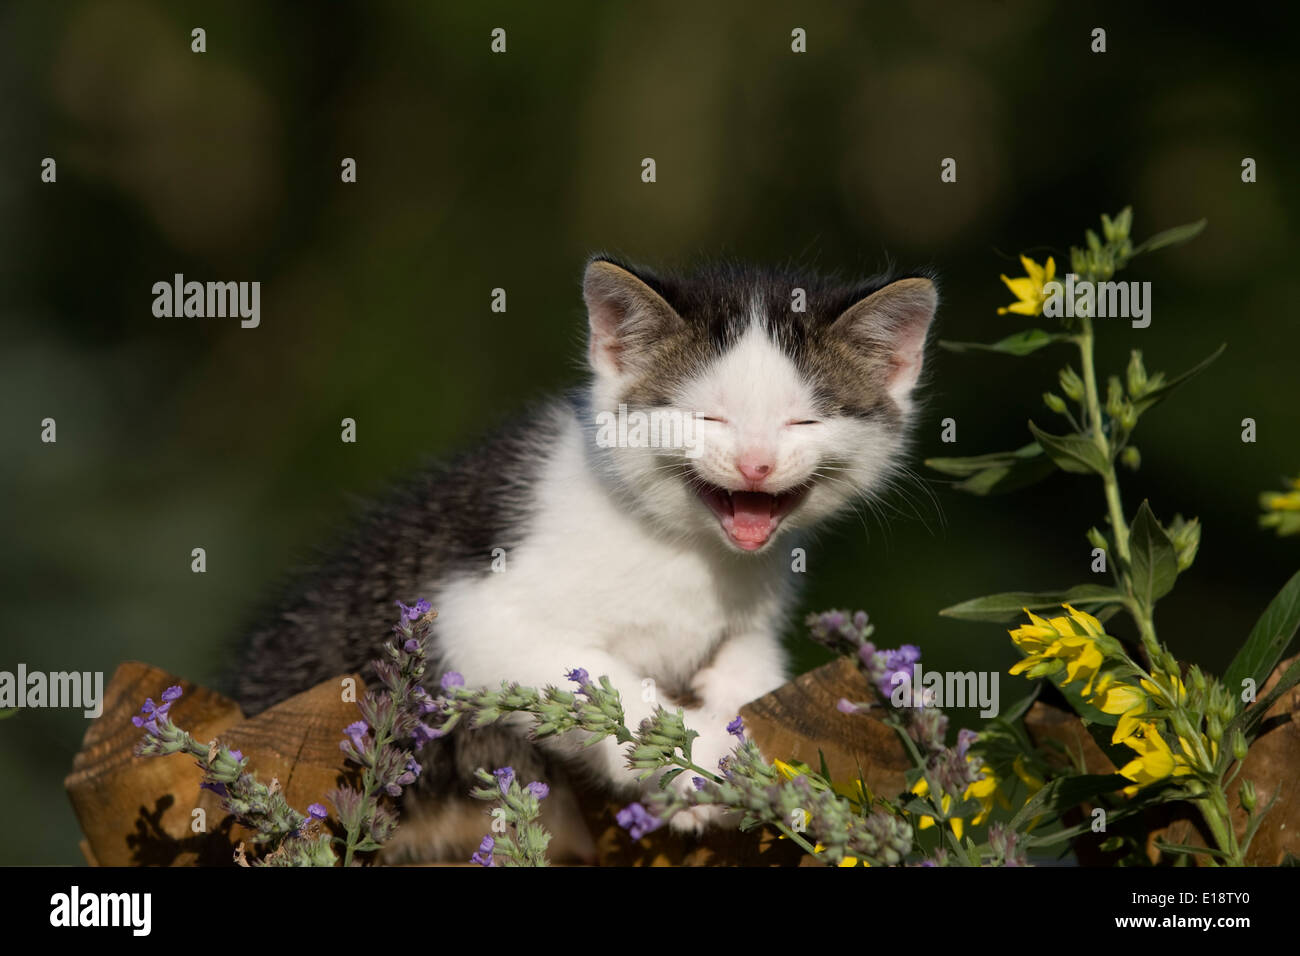 Laughing cat, kitten sitting on fence with flowers Banque D'Images